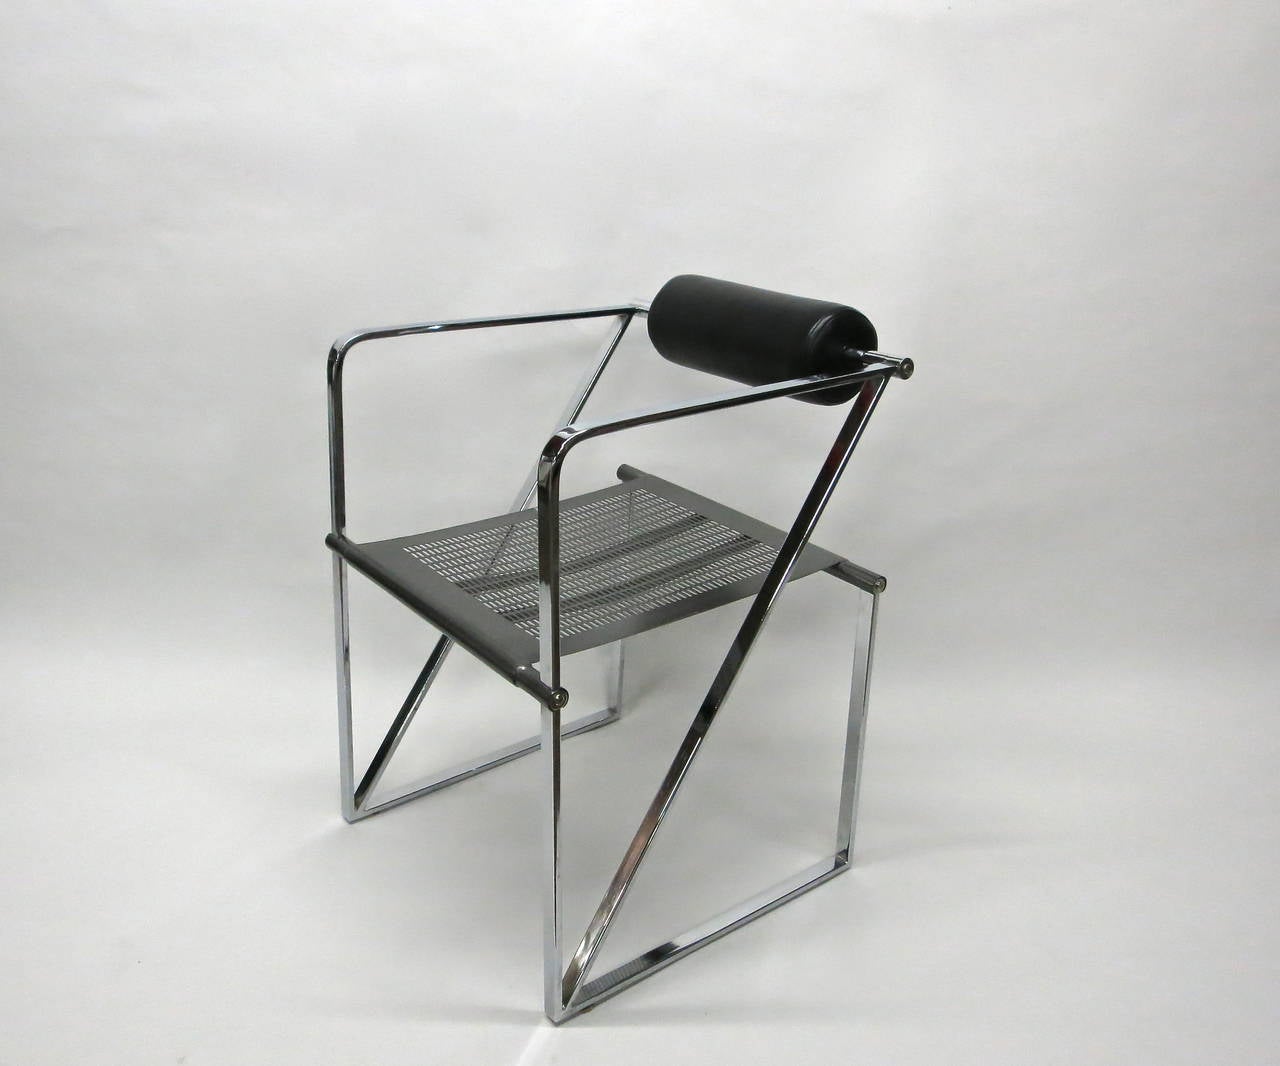 Italian Pair of Chairs by Mario Botta, Steel and Leather, circa 1980, Made in Italy